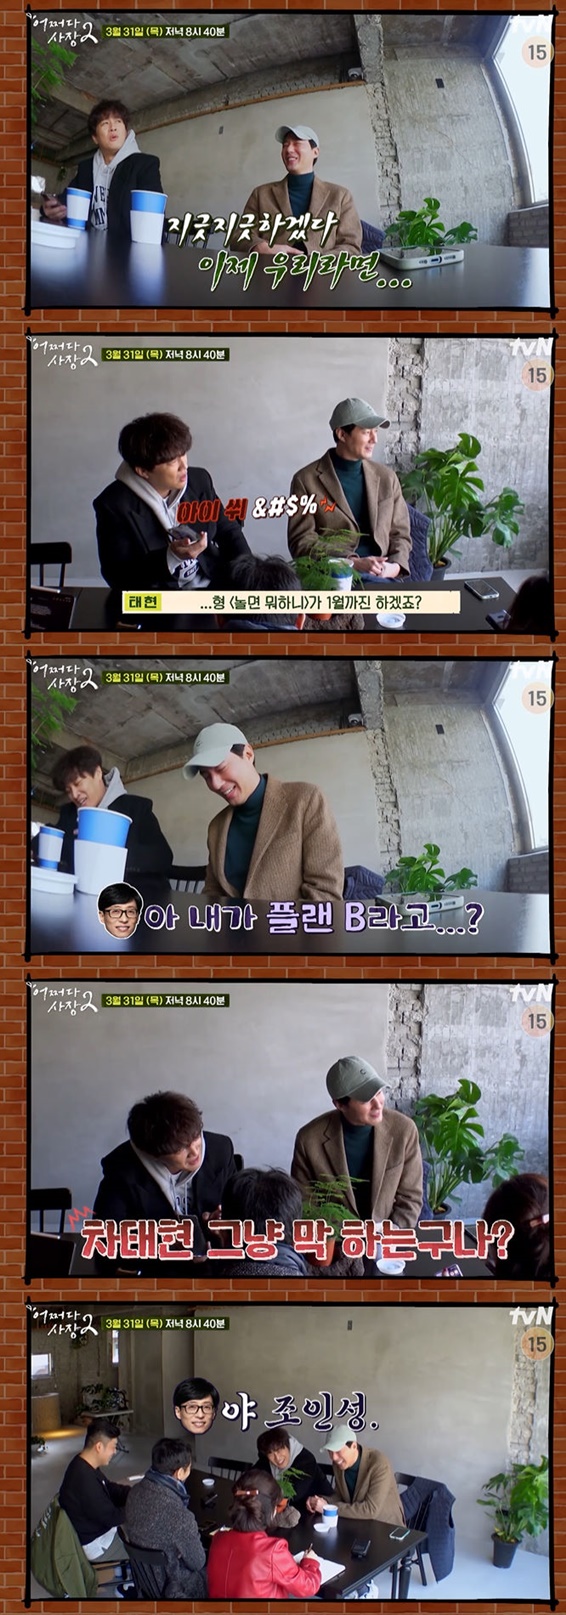 On the 24th, TVN entertainment program How the President 2 said, [Single undisclosed] Yoo Jae-Suk call connection! Lee Kwangsoo called and the response was...?(ft. Yuzagi Eosajang 2 is a story that almost comes out) In the video, Jo In-sung and Cha Tae-hyunun, who are pre-meeting, were included.Jo In-sung laughed at Cha Tae-hyun, who calls to join Yoo Jae-Suk, saying, We will be sick of it now.Yoo Jae-Suk replied to the question, What are you doing in the neck, in the gold? On Thursday, I shoot What are you doing when you play; Cha Tae-hyunun said, What are you doing when you play?He said, Mr. Ai and he said a harsh word, causing a laugh.Cha Tae-hyunun said, Check it on January 21st. Im sorry, but my brother is Plan B.Yoo Jae-Suk said, Cha Tae-hyun is very blocking. He said, I am comfortable because it is Plan B.Cha Tae-hyunun explained that it is so desperate to build Plan B, and Yoo Jae-Suk agreed.Jo In-sung said, Do not be sad even if you do not call me. Yoo Jae-Suk said, Hey...Jo In-sung.Cha Tae-hyunun called Yoo Jae-Suk after the end of the business; when he said Anything A was decided, Yoo Jae-Suk asked, Who is it?When Cha Tae-hyunun replied, I cant teach you, Yoo Jae-Suk said, Youre a bit like that.I do not, and you go to the Kahn, he laughed with anger.Cha Tae-hyun said, I have a brother. When Changsoo changed, Yoo Jae-Suk said, Personality? My brother is personality.Yoo Jae-Suk said in the voice of Kwangsoo, Who are you? And even though he was joking, Kwangsoo, why are you there?When Jo In-sung changed the phone, Kwangsoo said, The tone of voice changes.Jo In-sung said, I only did Hello at the end of Yoo Jae-Suk, He is basic.Kwangsoo took charge of the casser, said Yoo Jae-Suk, who added, If you cook it, it is a disaster. Yoo Jae-Suk said, If you do, why is he going there?Yoo Jae-Suk said, She has been sick of actors these days. You should make Kwangsoo a little better.Kwangsoo was surprised to see that he could not swallow the food in his mouth.Yoo Jae-Suk also welcomed Kim Woo-bin, who appeared on the air for a long time.There is also Lim Joo-hwan, Yoo Jae-Suk said, It was a disaster, he said, why is Kwangsoo in the meantime?I know what role Kwangsoo plays, he said, adding, Its not a hue, its a hue.Everyone has suffered and if you are bored, call again, said Yoo Jae-Suk, who encouraged the cast, bring in the Prince of Girona specialties.I will match the Providence of Girona ship for 300,000 won, he said, a little sales, he said, you have changed a lot, he said.If you have 300,000 won worth of the Providence of Girona ship in front of your house, you know we sent it, he said, then I buy it.It was a warm-hearted response.Yoo Jae-Suk concluded the call with the words I would like to ask Kwangsoo well and expressed his affection for Kwangsoo.Photo = Naver TV